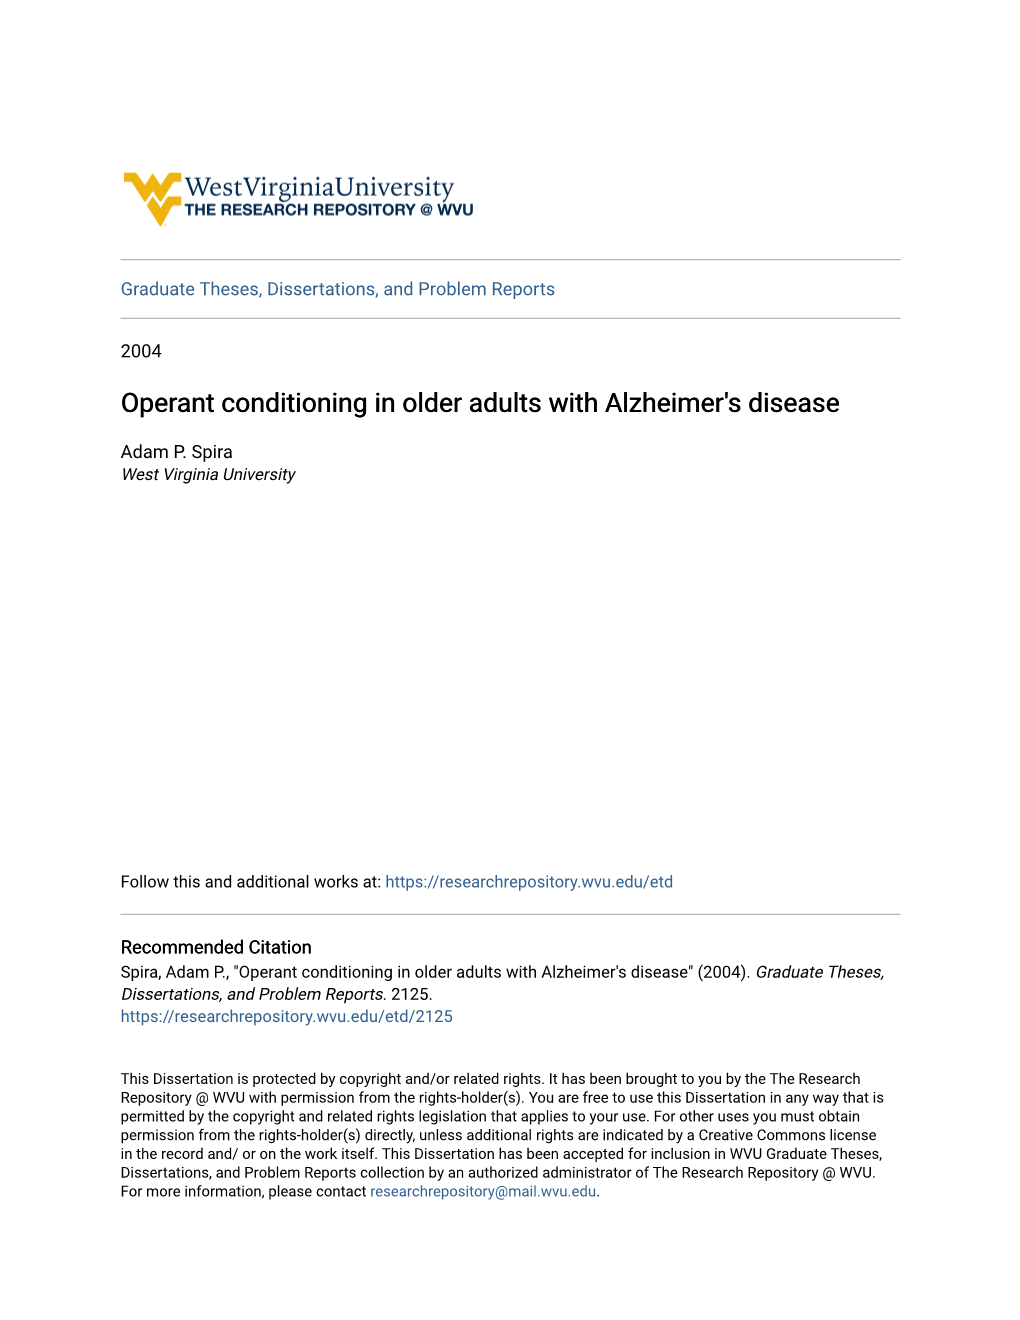 Operant Conditioning in Older Adults with Alzheimer's Disease